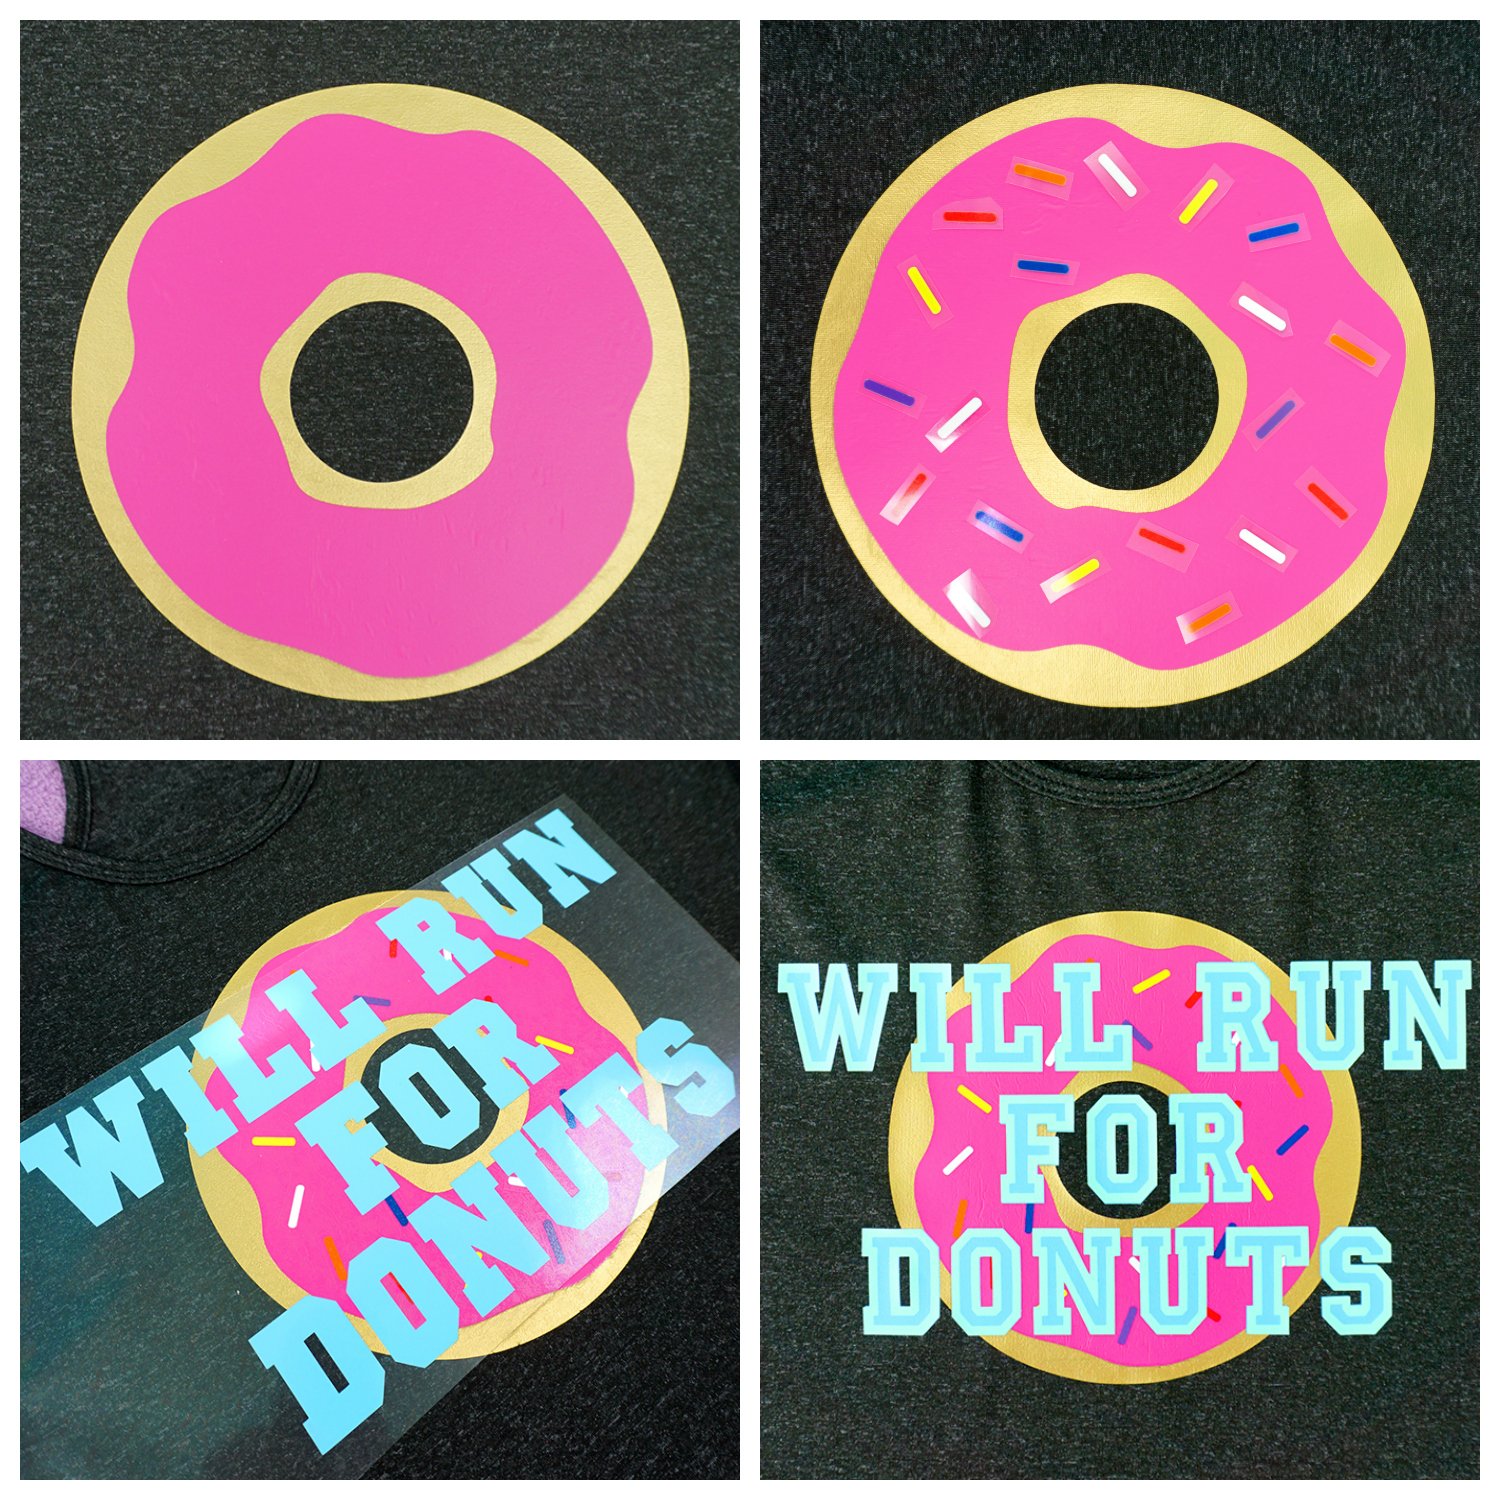 will run for donuts design being layered